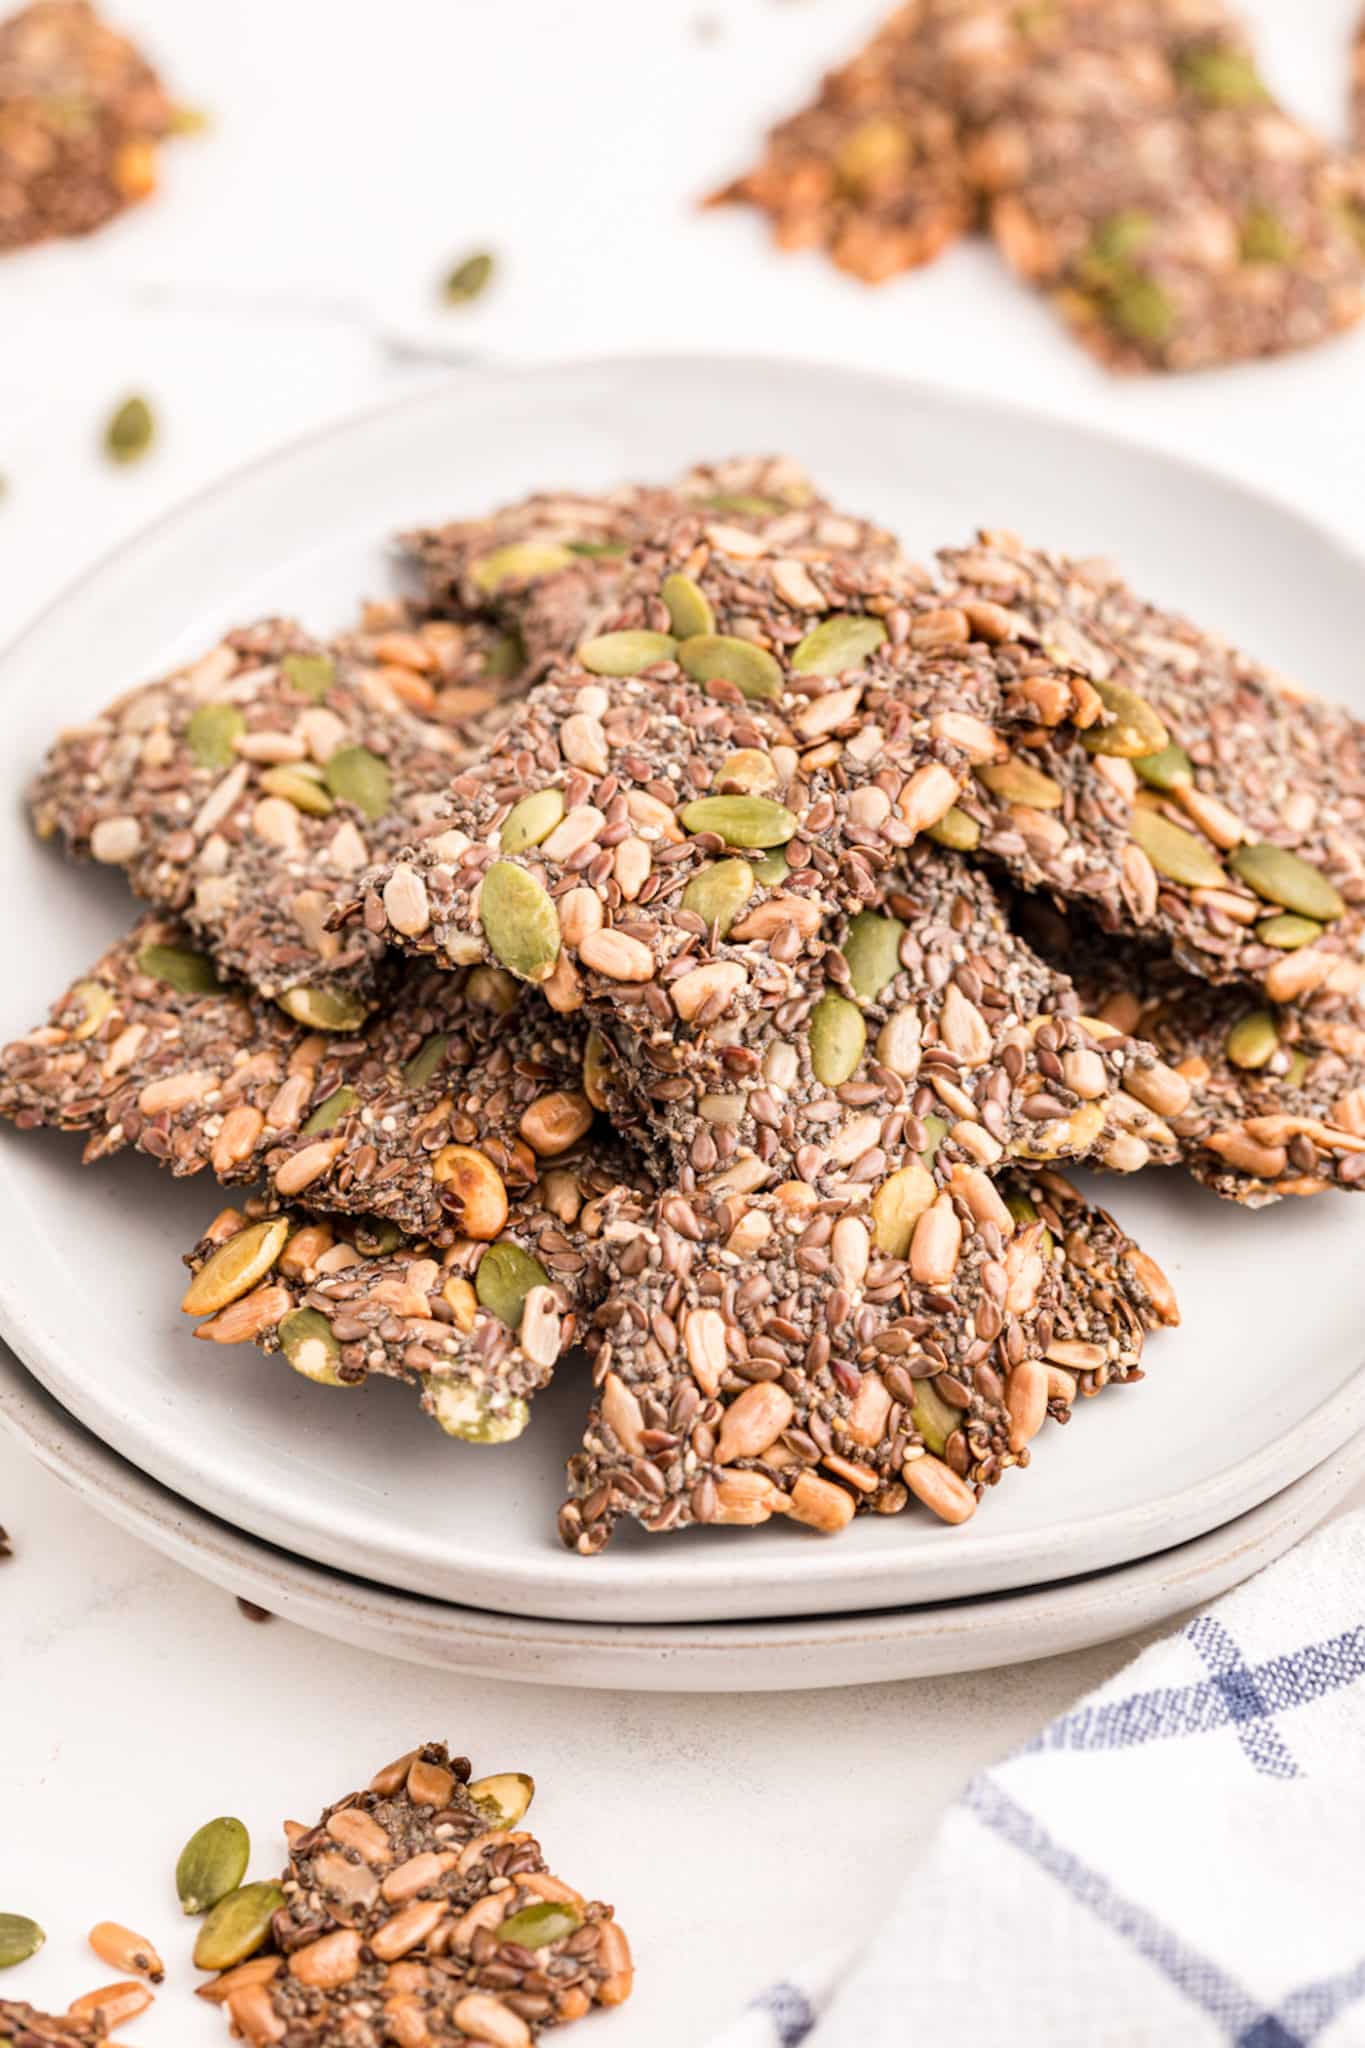 Homemade seed crackers piled up on a white plate.